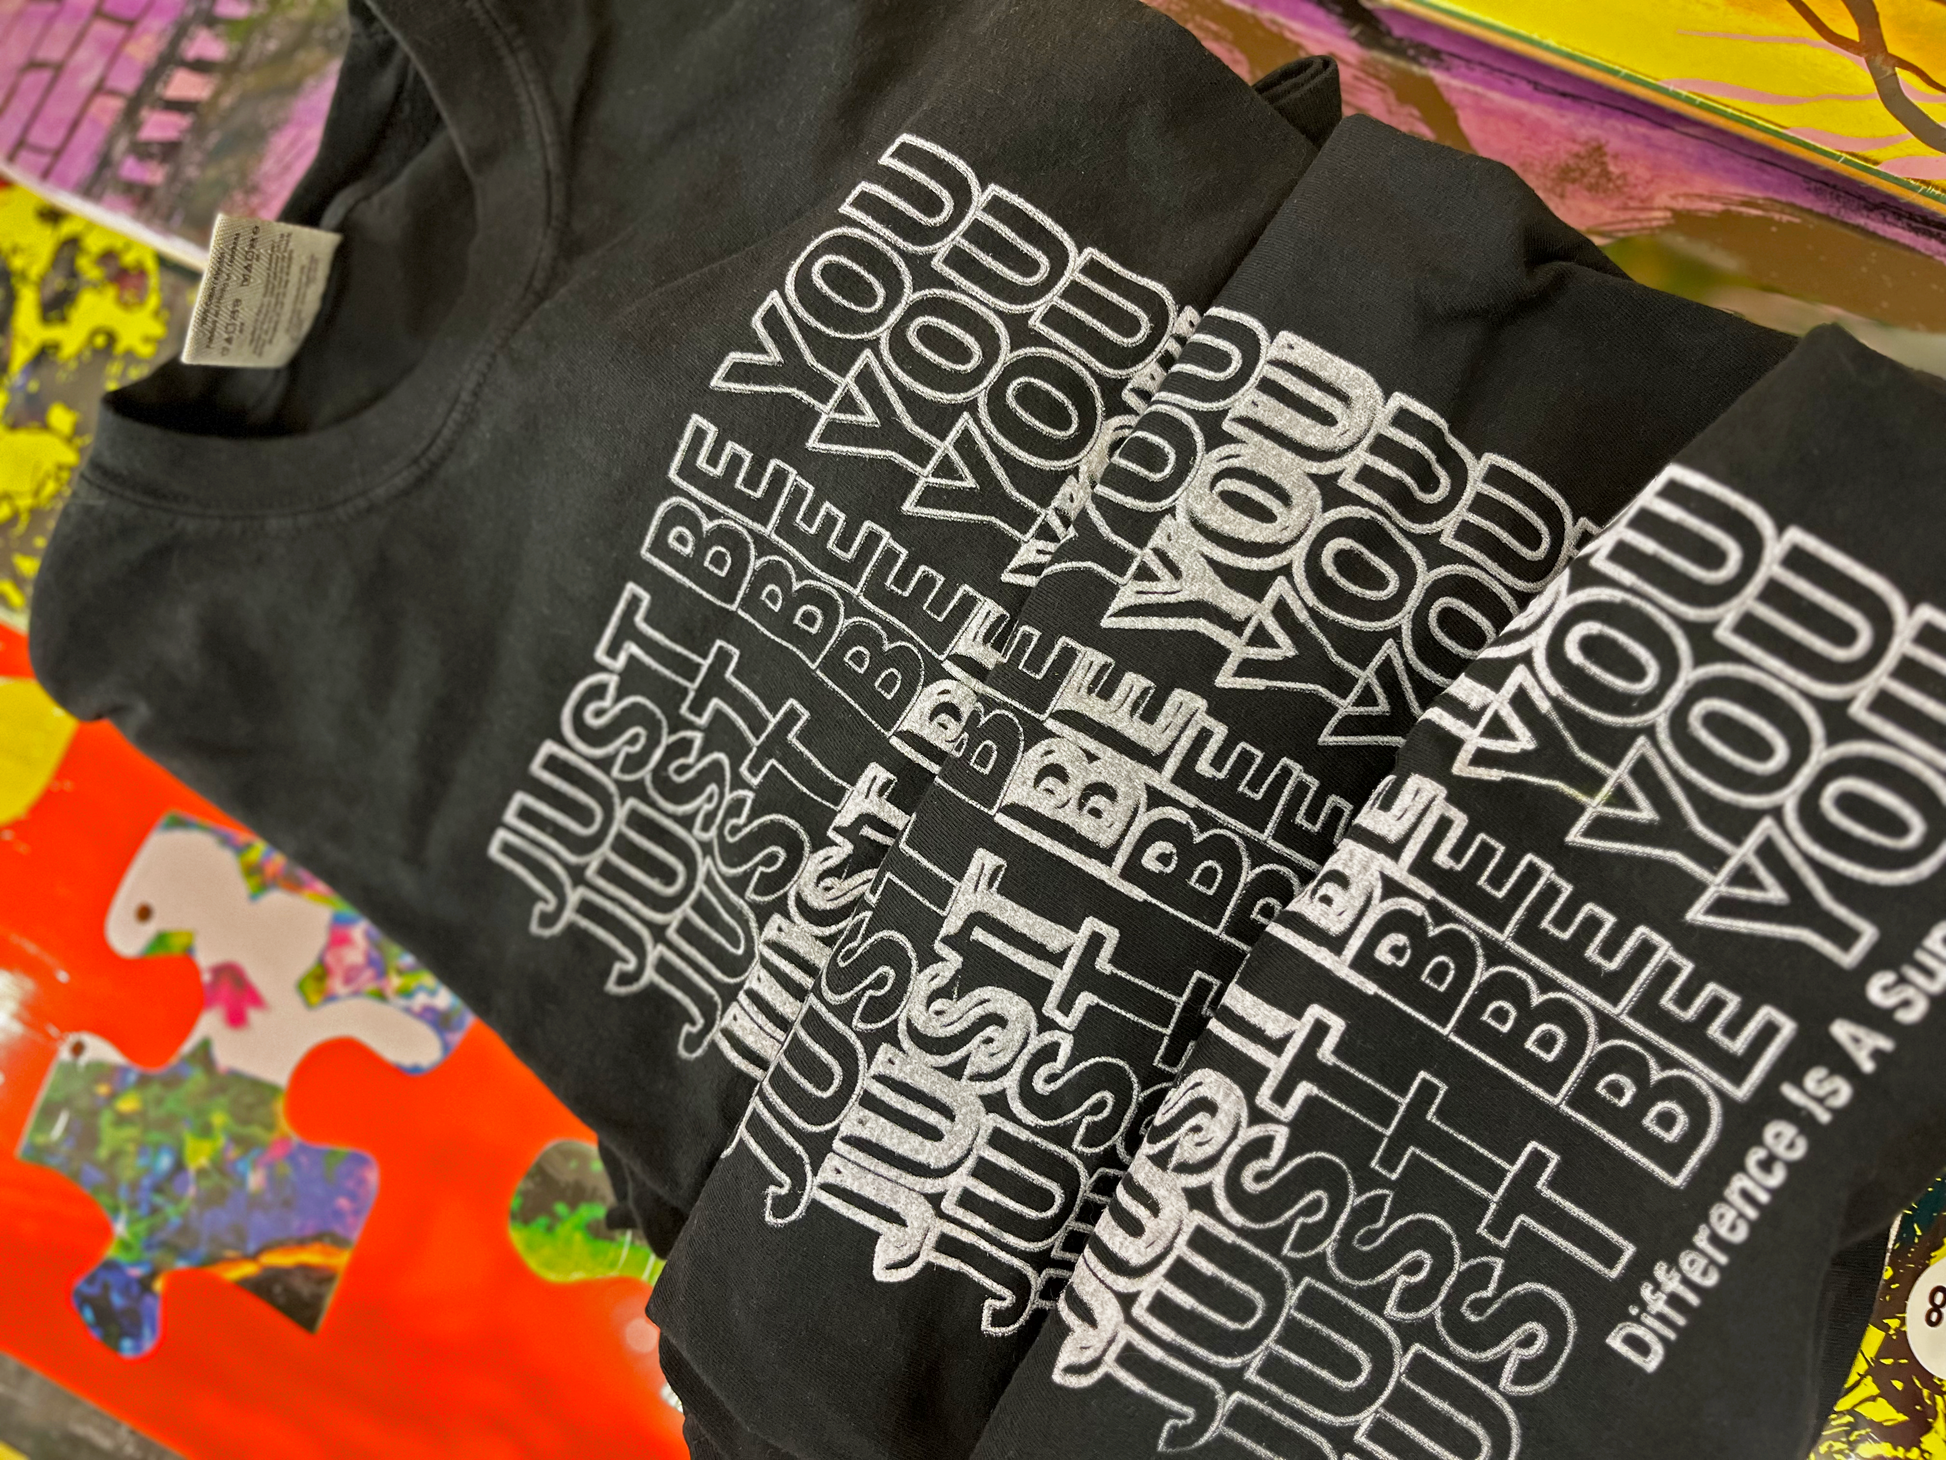 Stack of black t-shirts featuring a design that says "Just Be You" repeated seven times, and "Difference is a Superpower" in smaller text underneath. The design is white. 